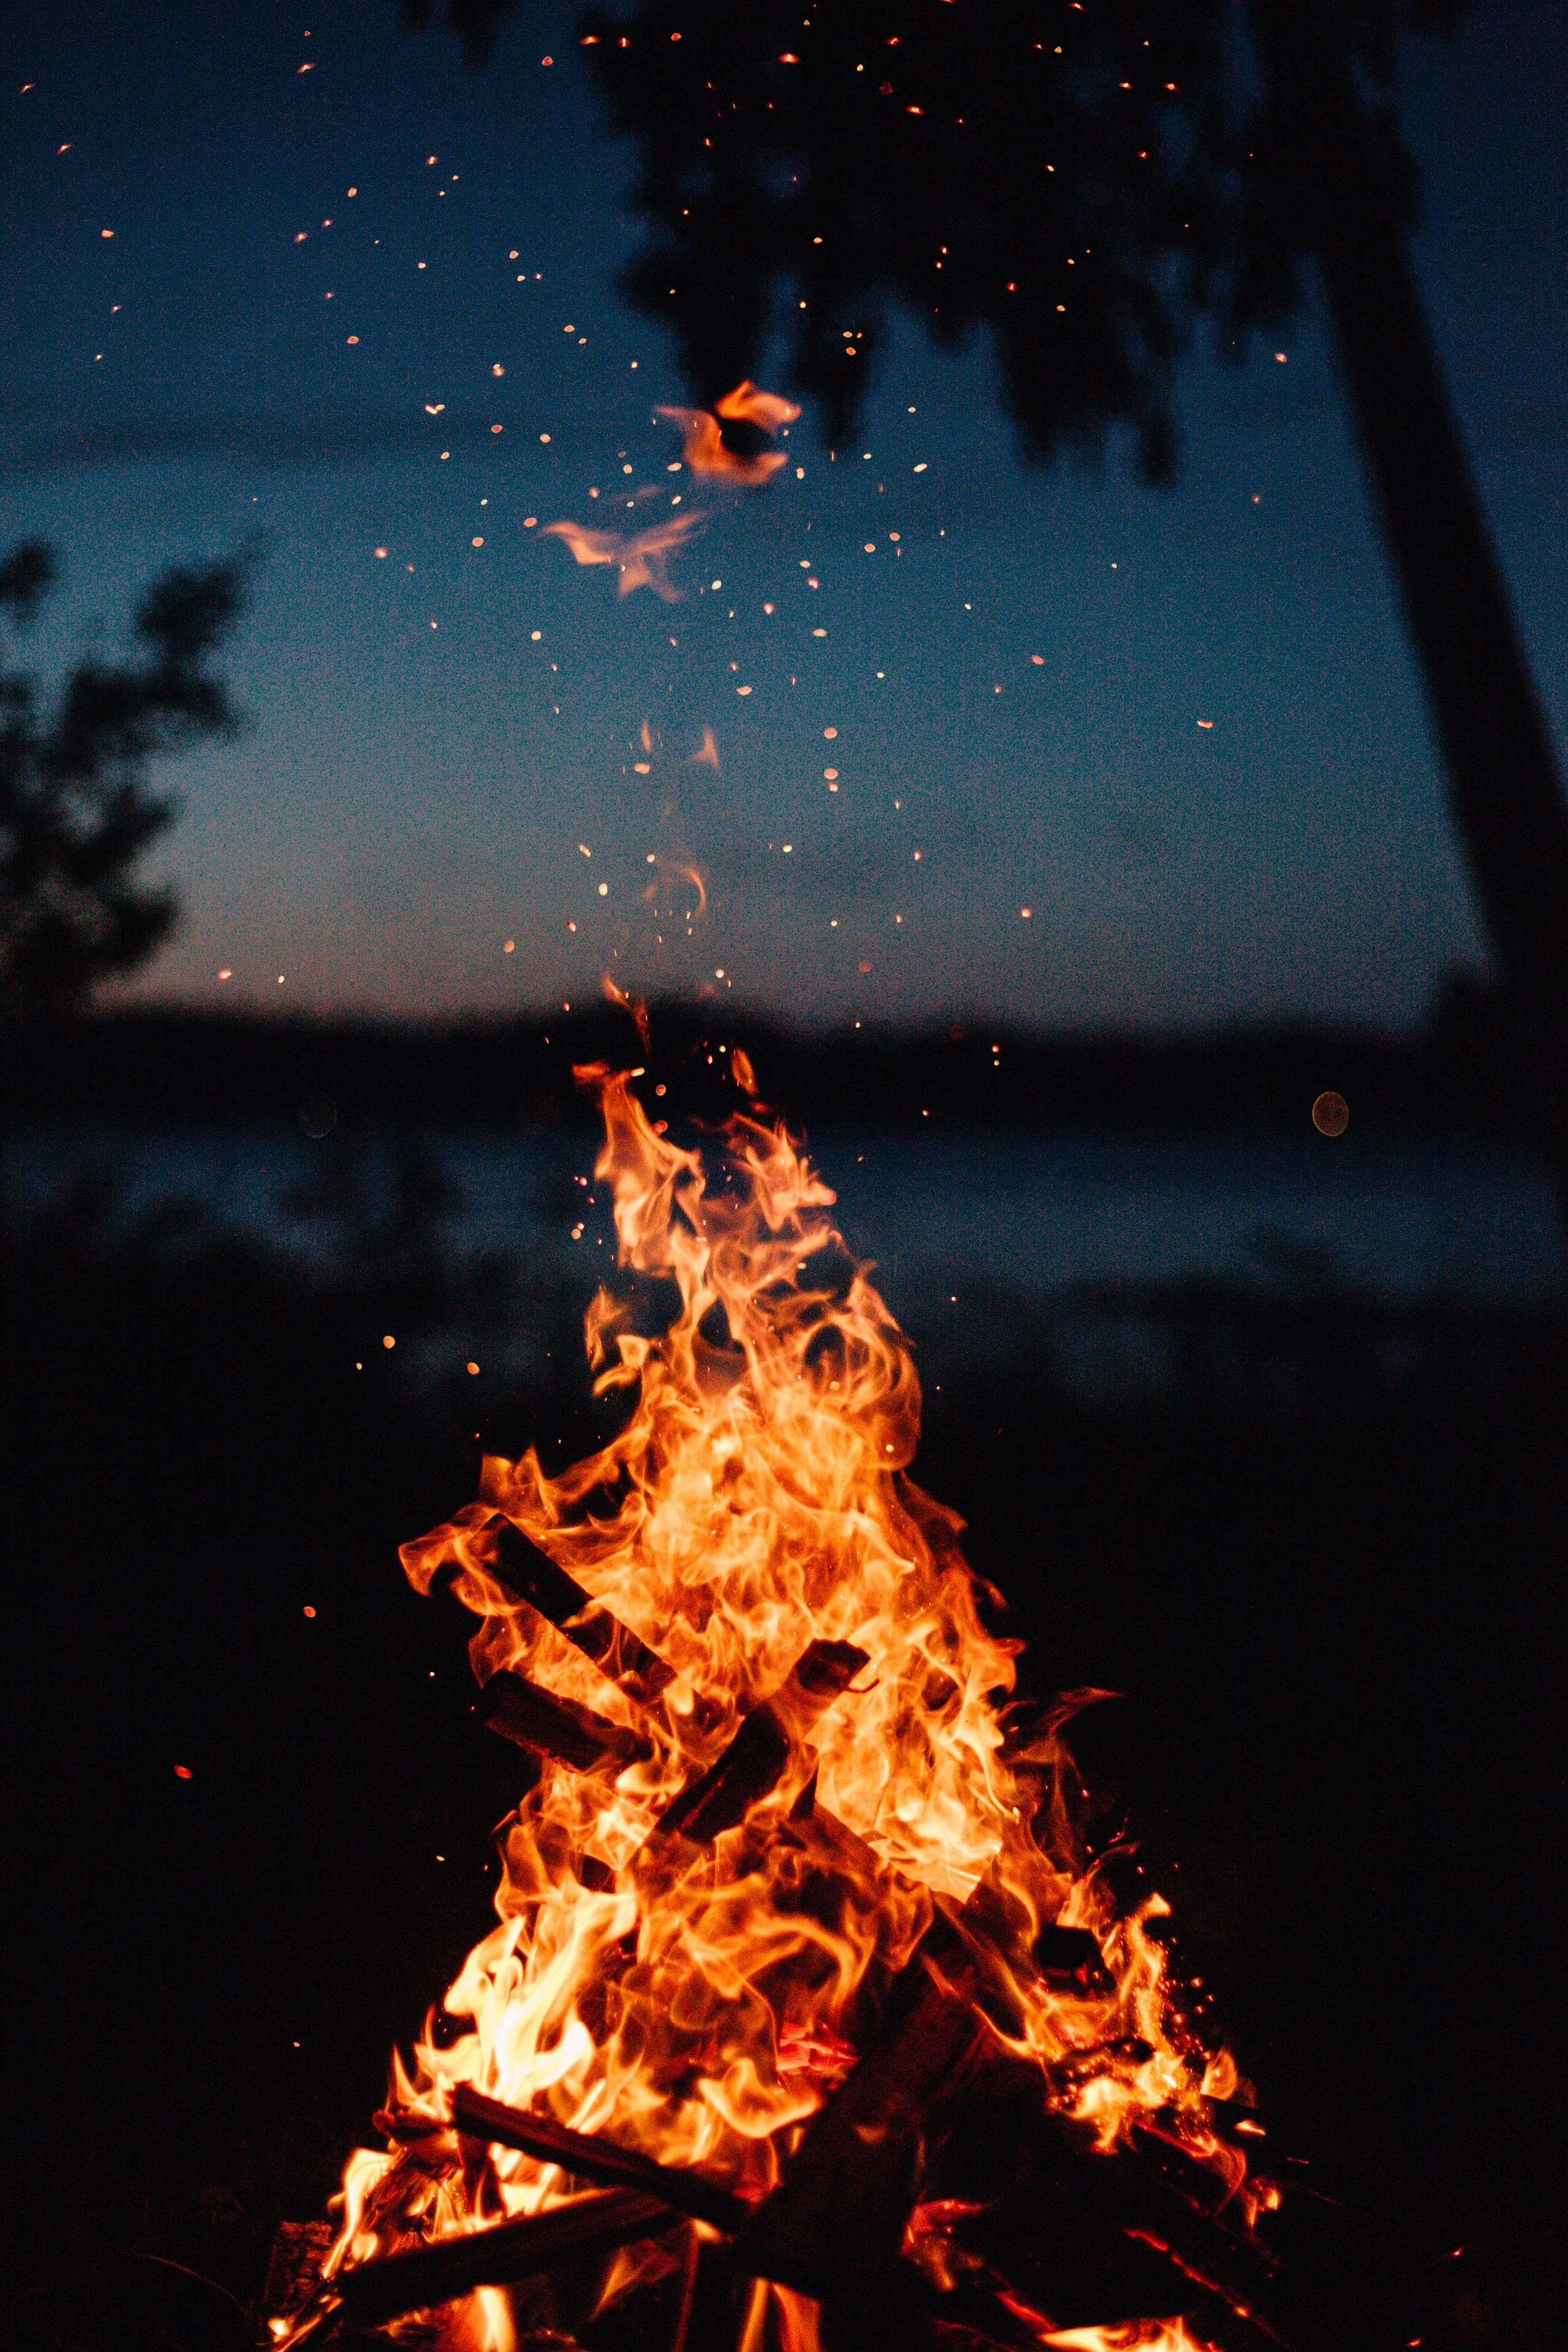 Best AMOLED Fire image. Fire, Fire image, Fire photography